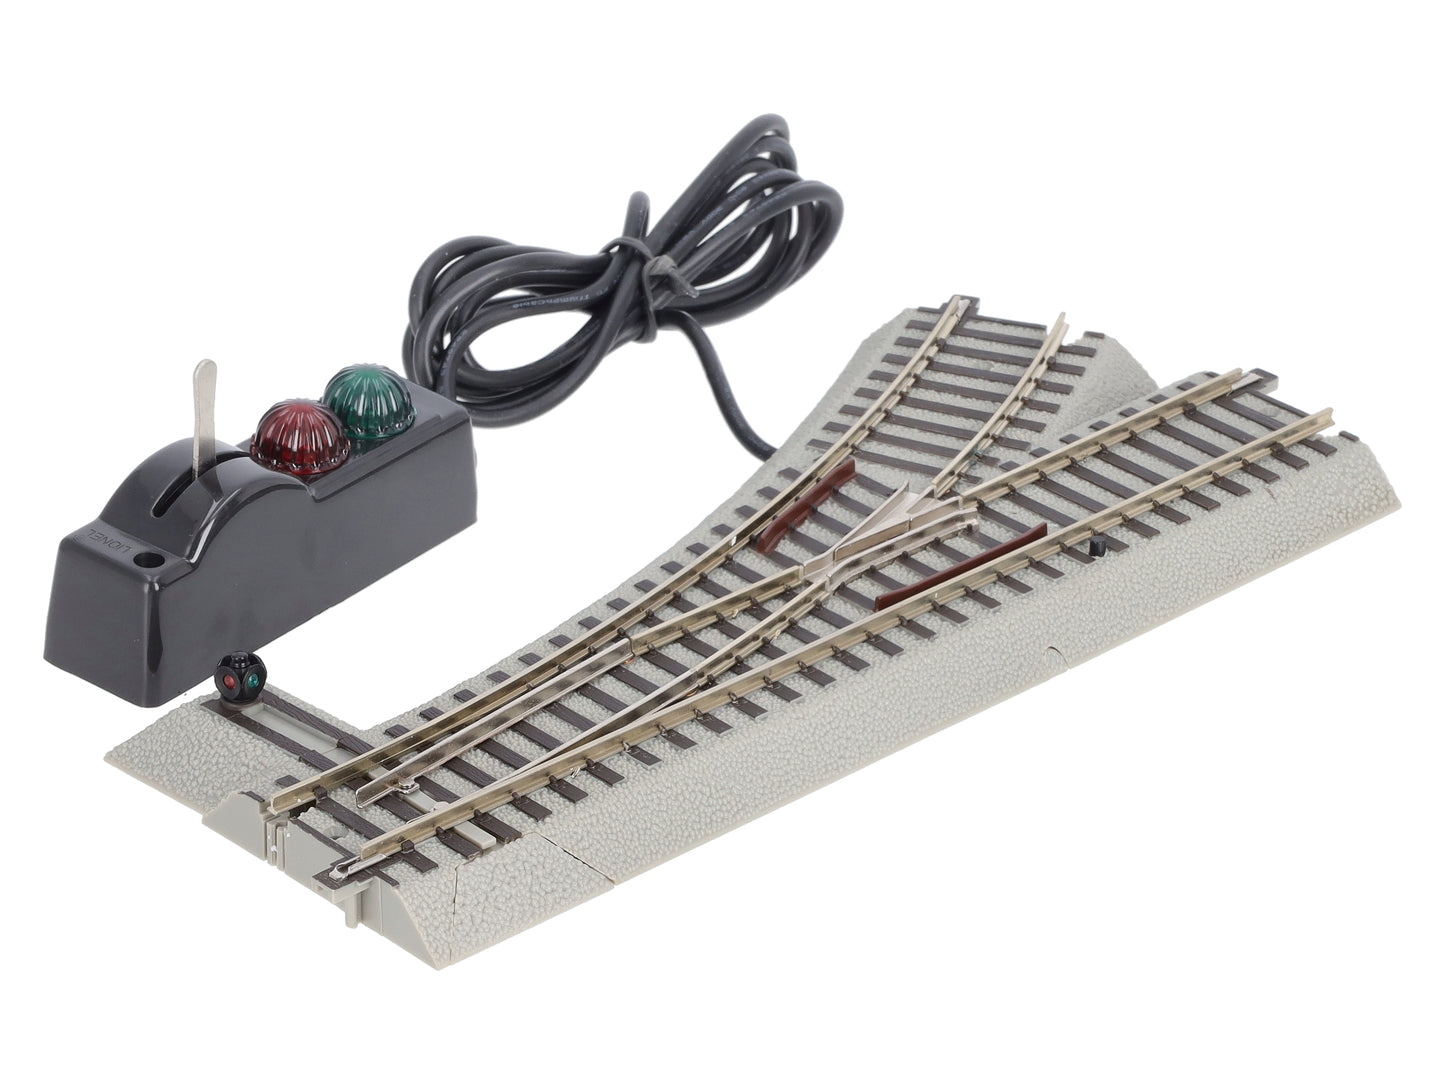 American Flyer 6-47941 S Left Hand R-20 FasTrack Command/Remote Switch Turnout